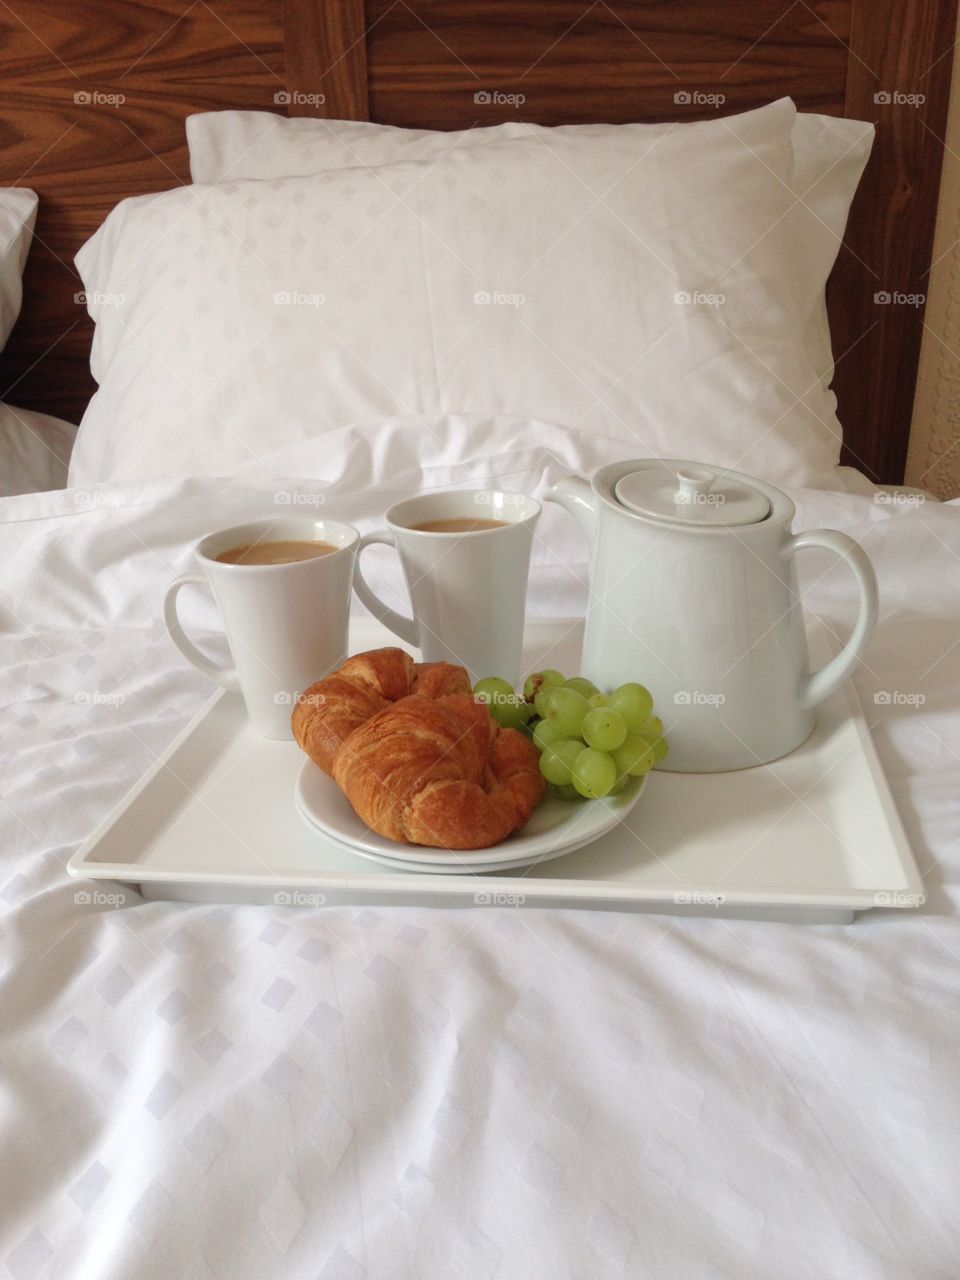 Lazy day's!  Breakfast in bed